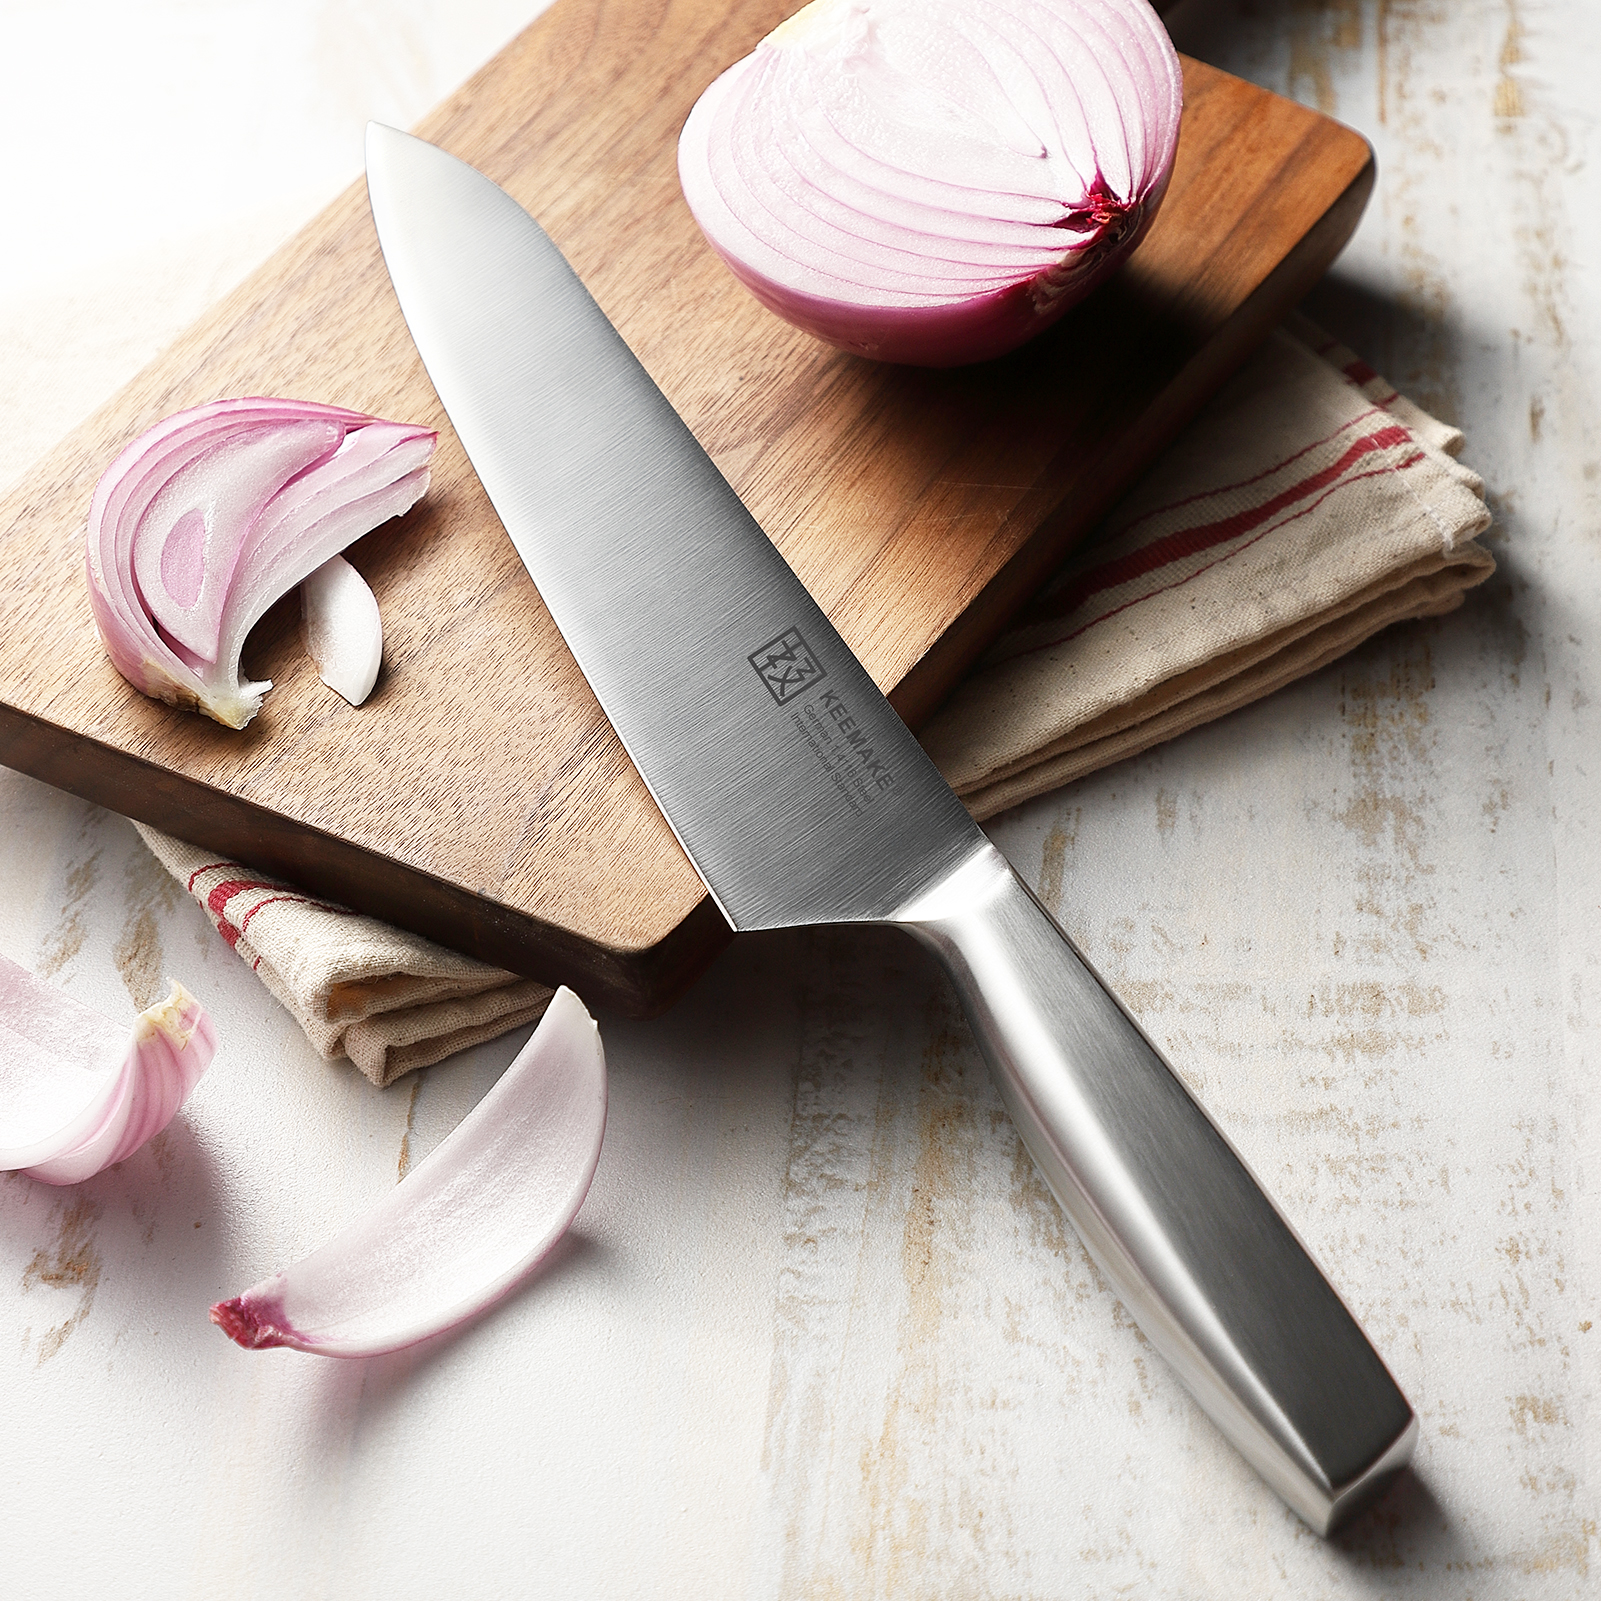 KEEMAKE 8inch Chef knife high carbon stainless steel 1.4116 for meat cutting